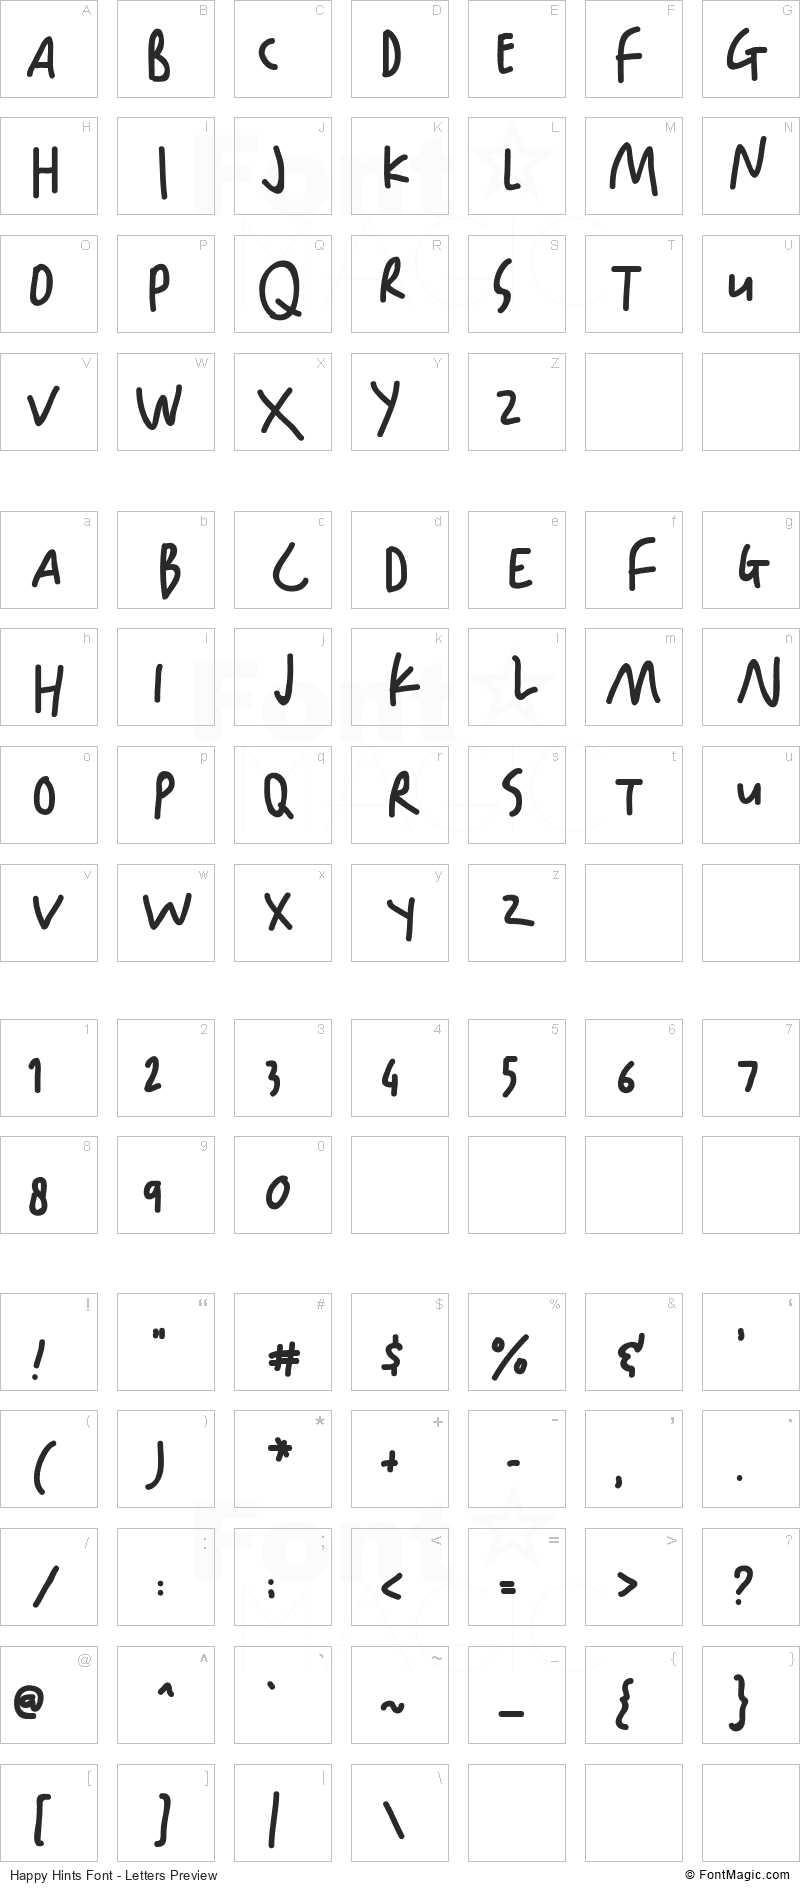 Happy Hints Font - All Latters Preview Chart